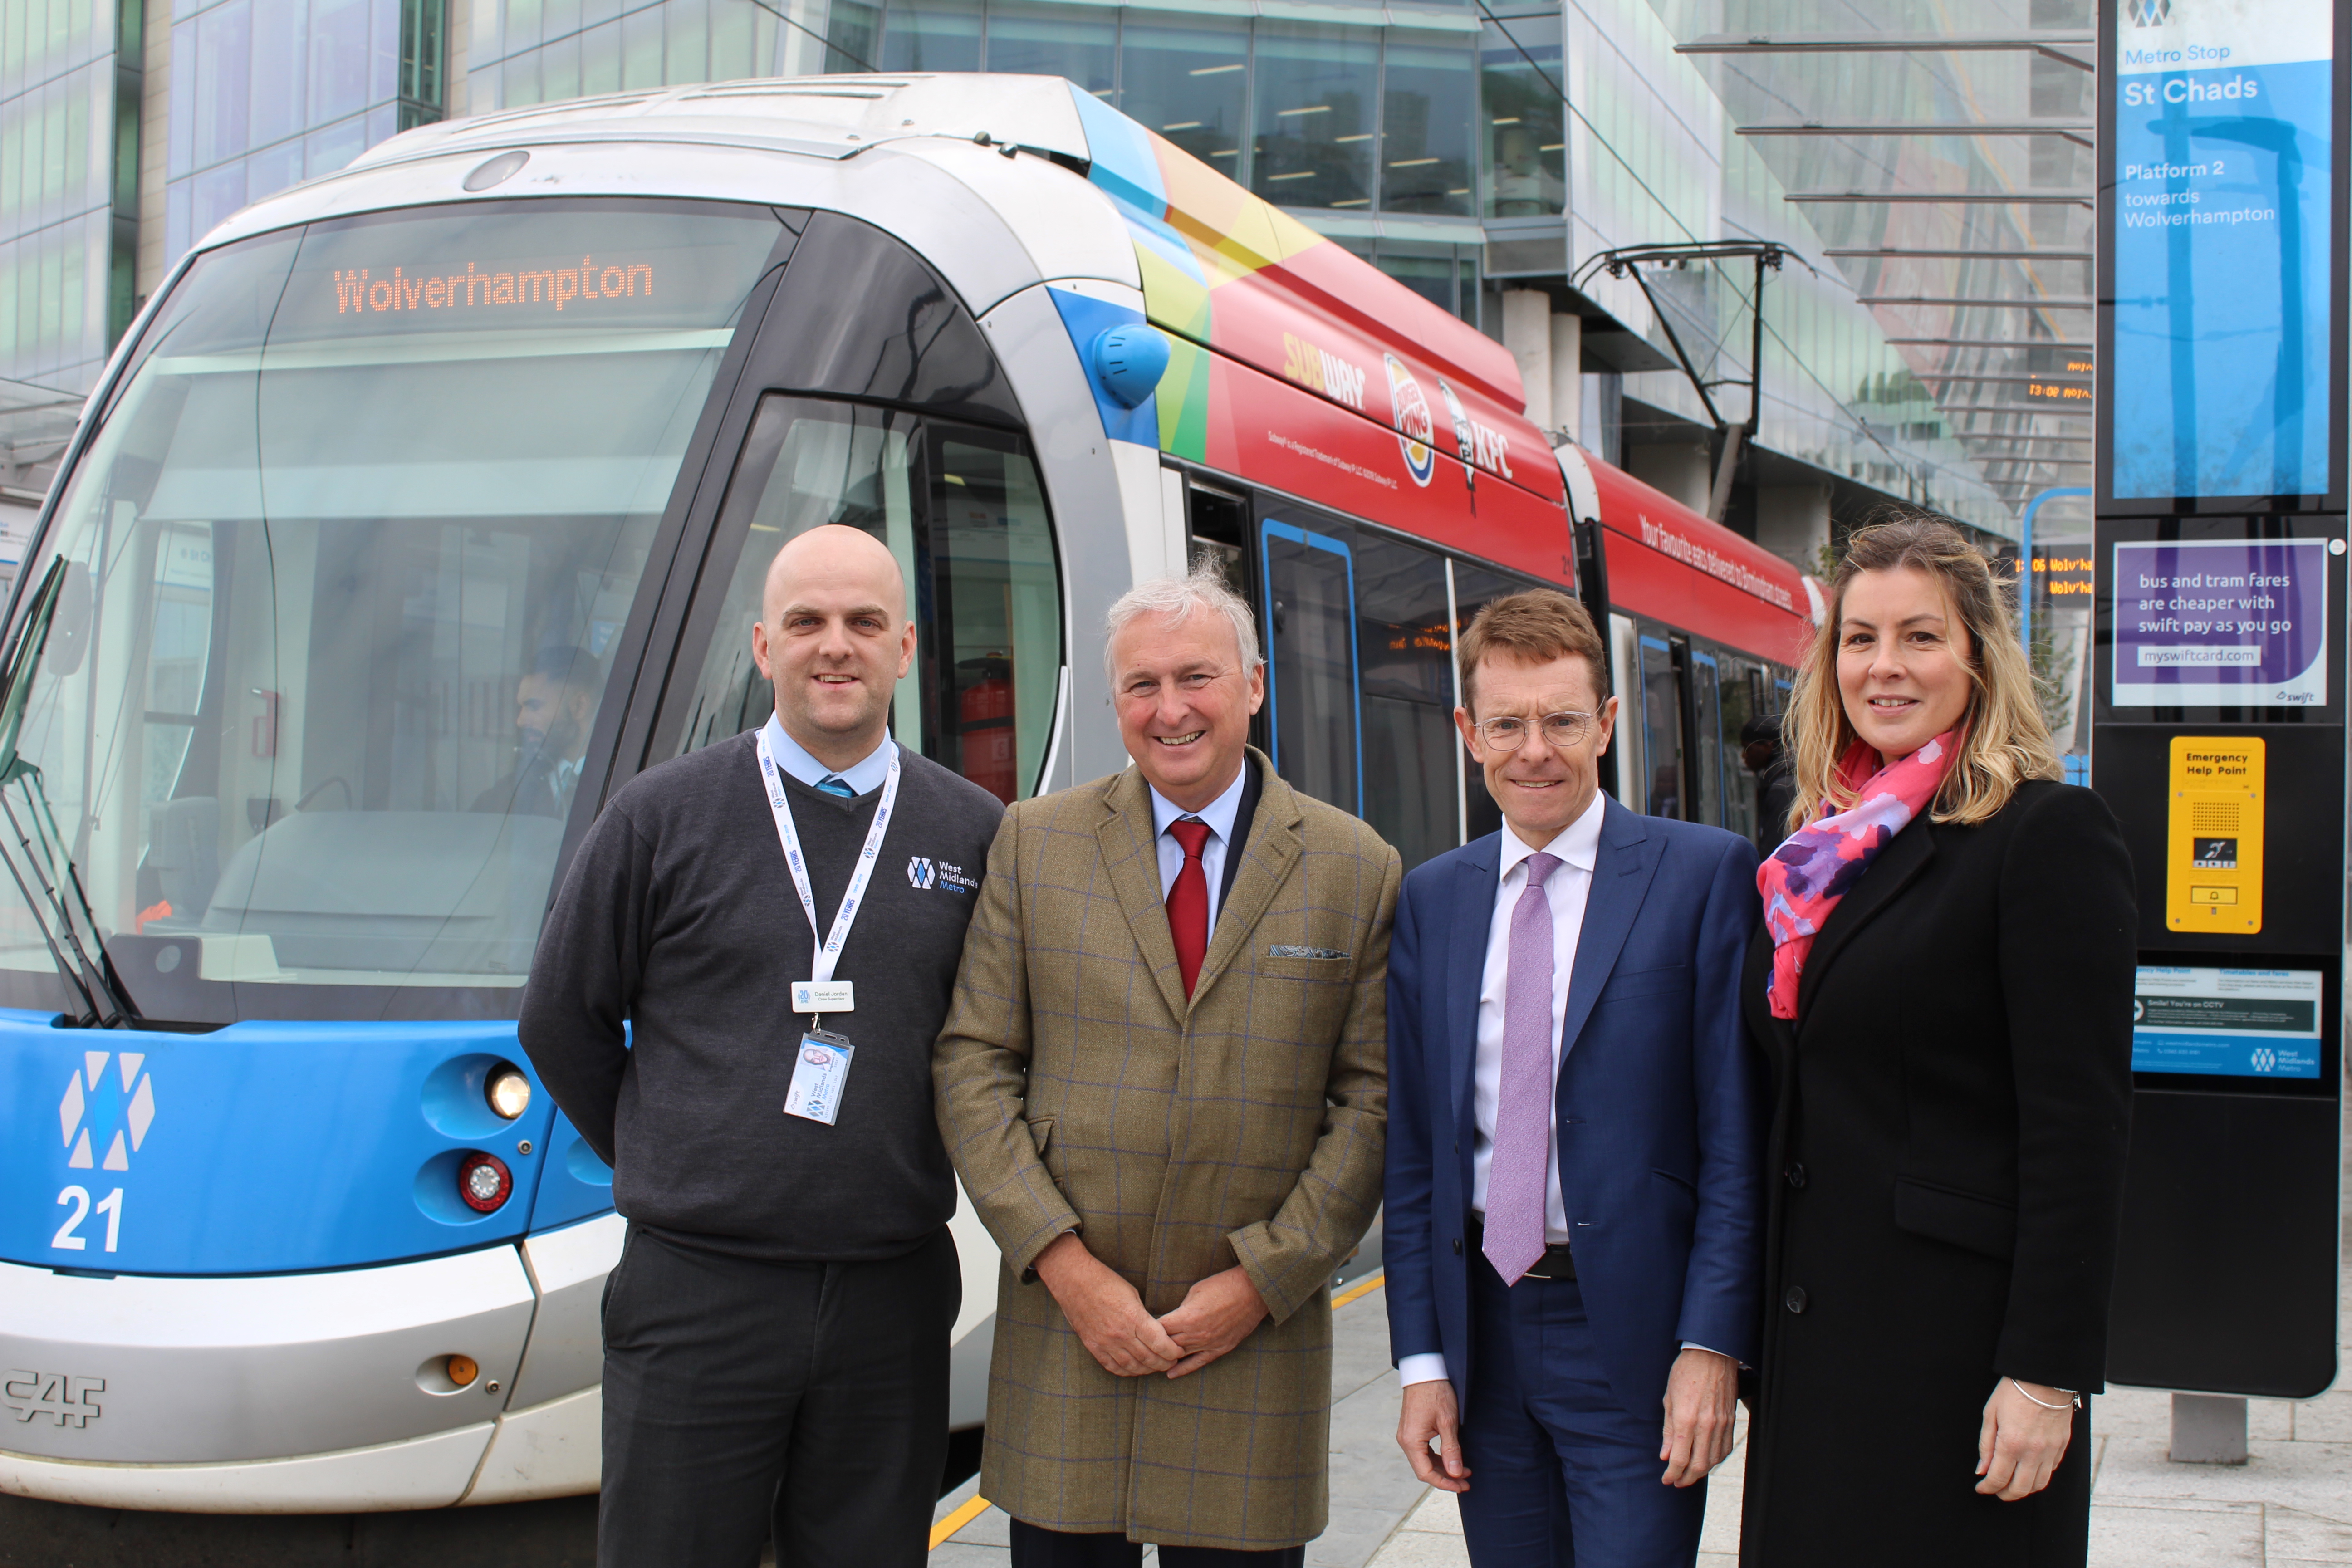 LtoR: Dan Jordan, crew supervisor for West Midlands Metro, Cllr Ian Ward, WMCA portfolio holder for transport and leader of Birmingham City Council, Andy Street, Mayor of the West Midlands, and Kate Austen, business development manager with CAF